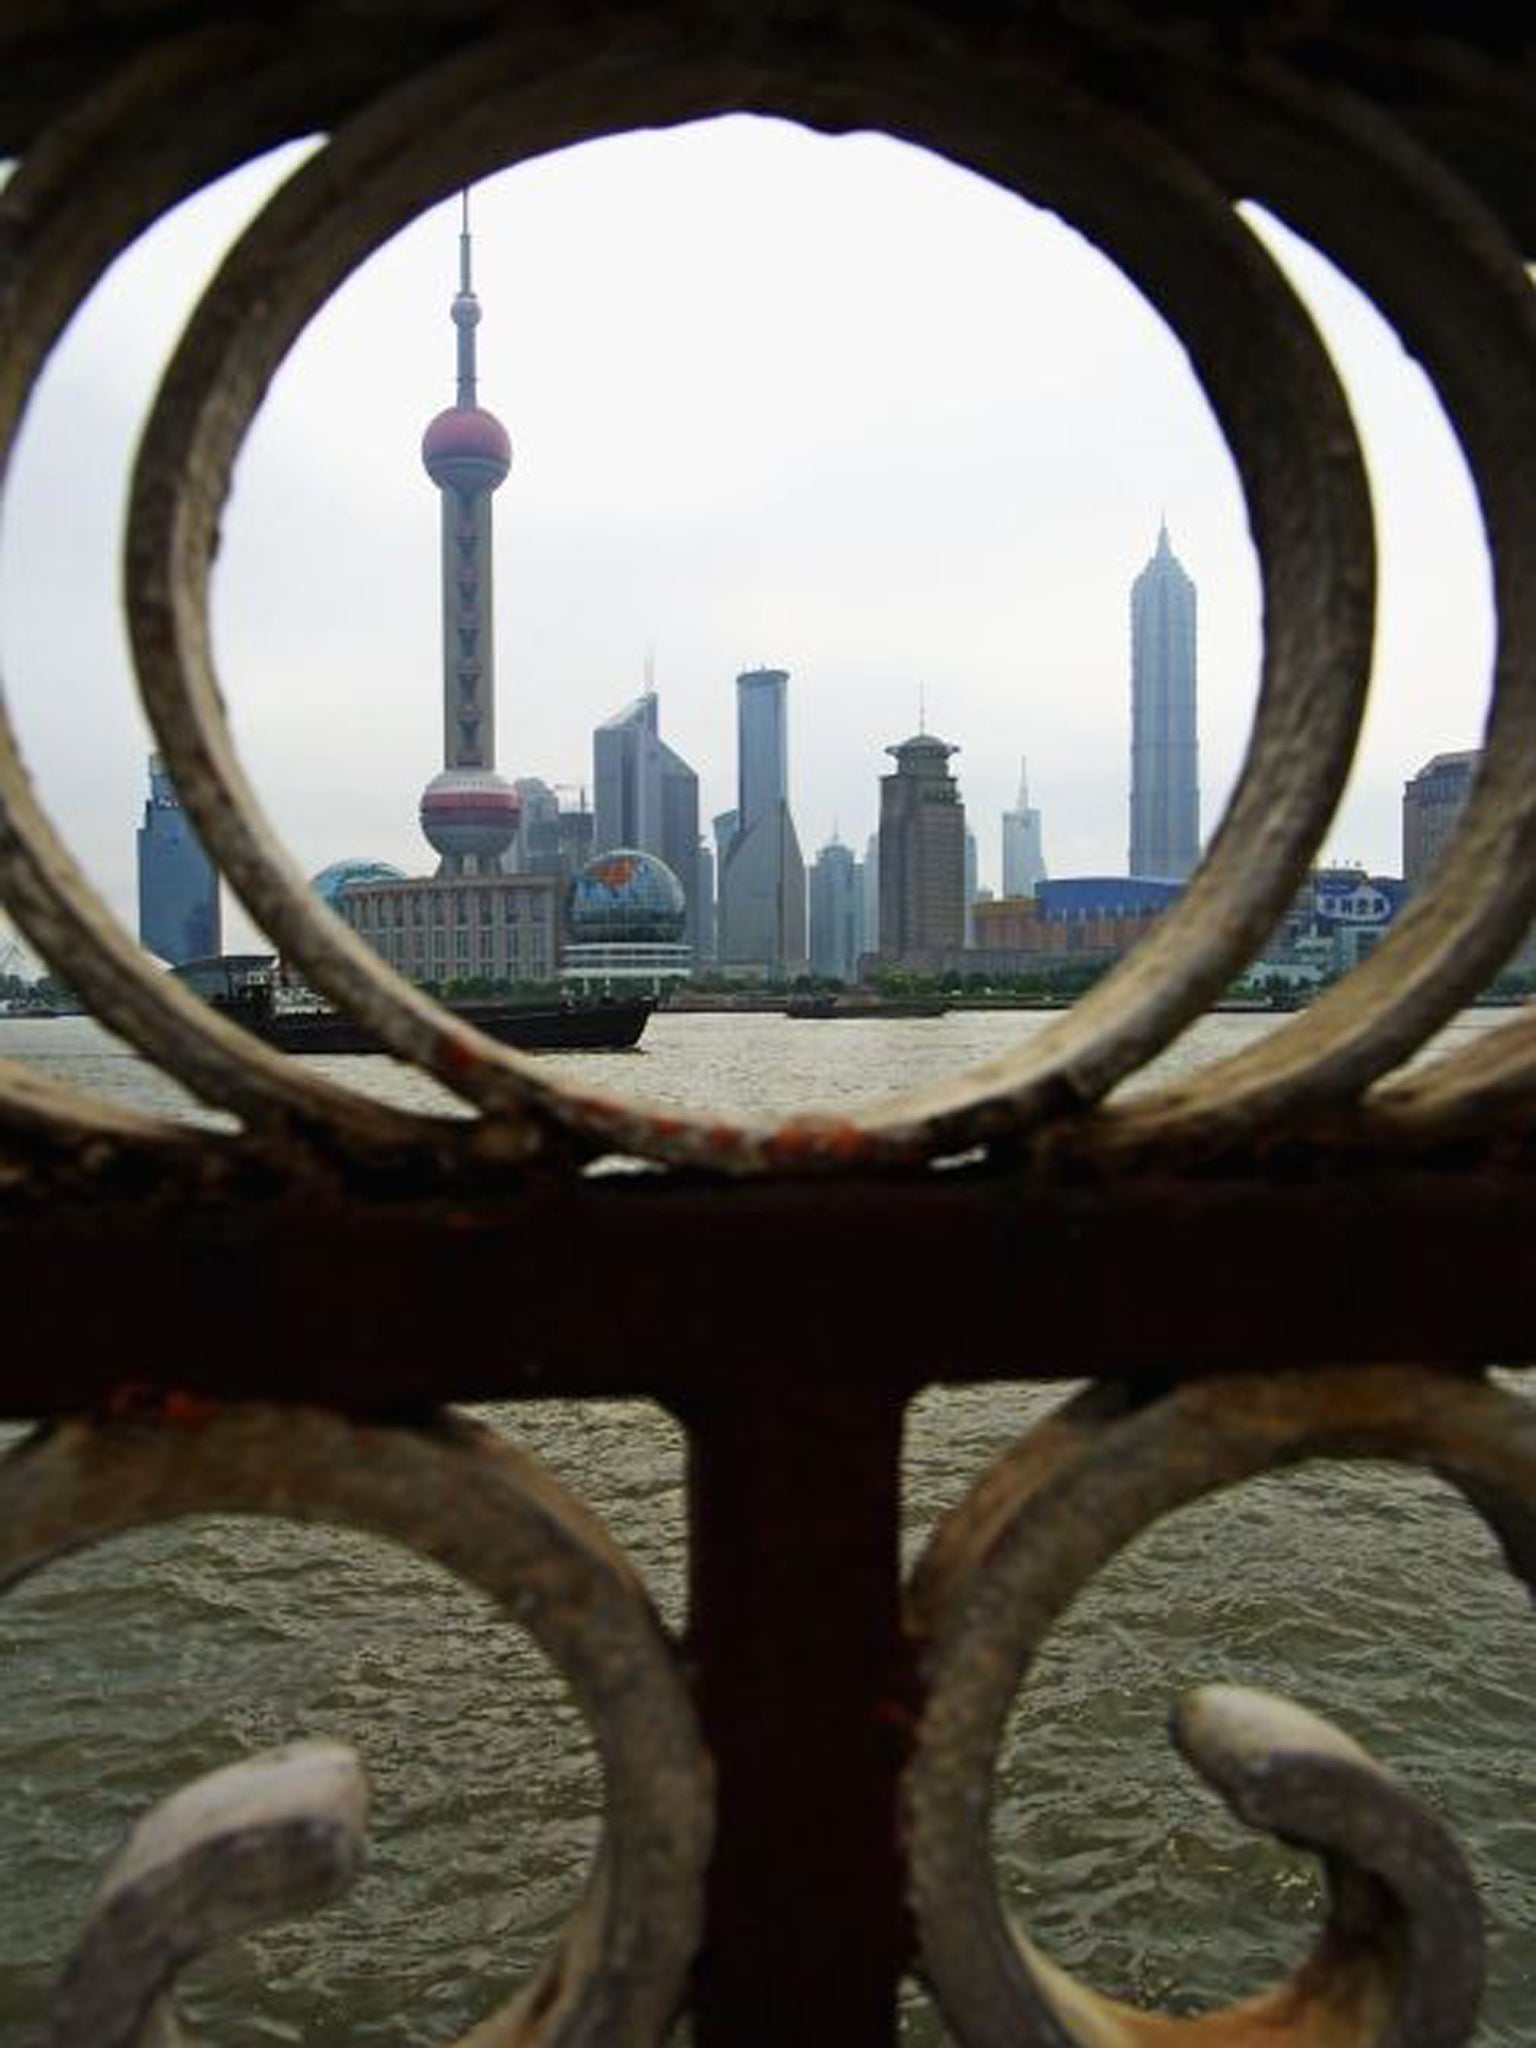 'If there is a villain, it is Shanghai itself'